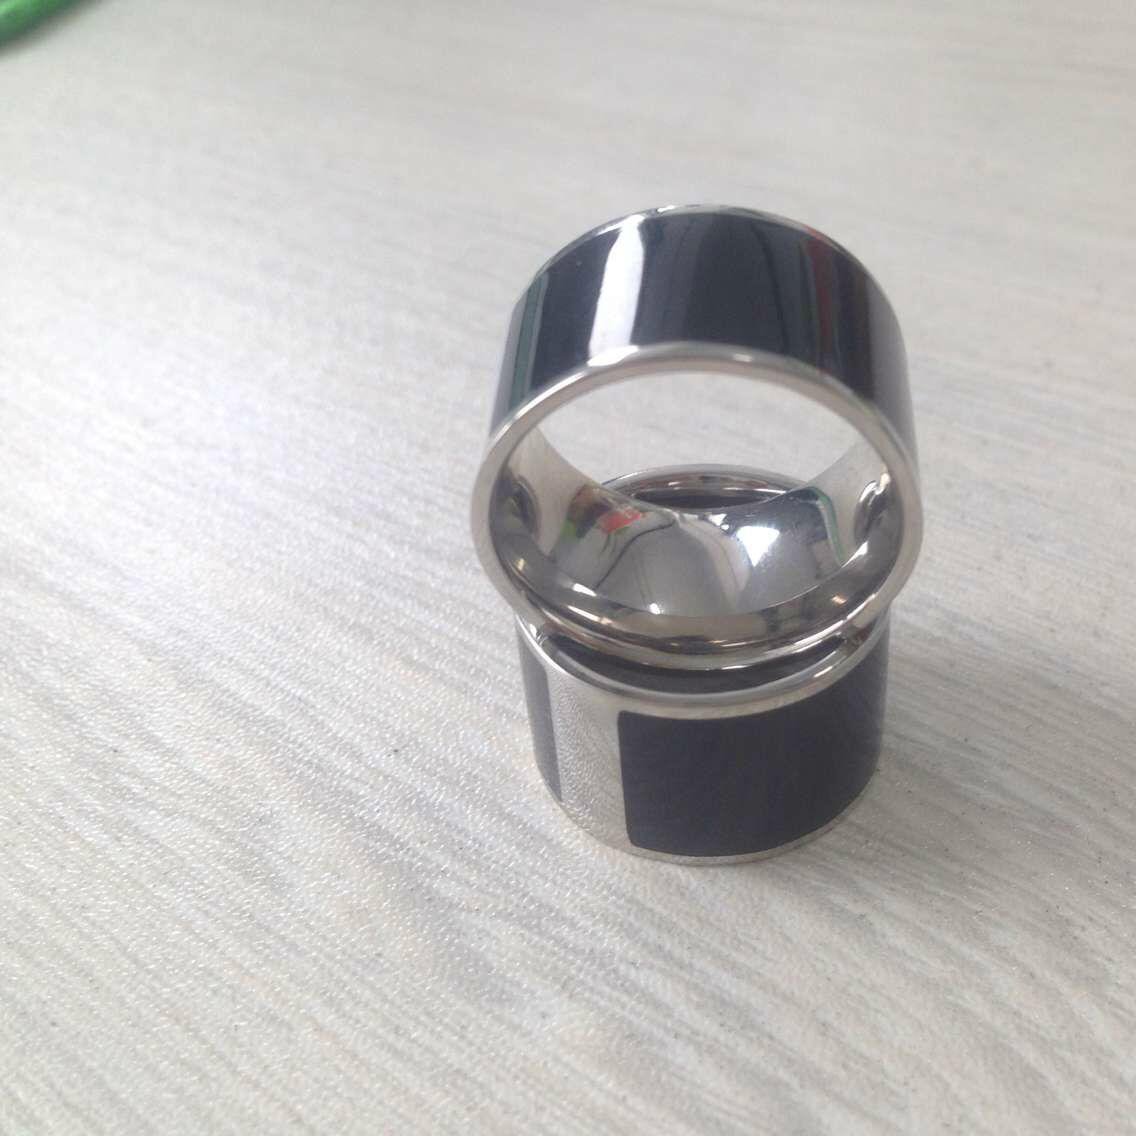 nfc ring,rfid ring with NATG213 for rfid payment system (gyrfidstore) 3